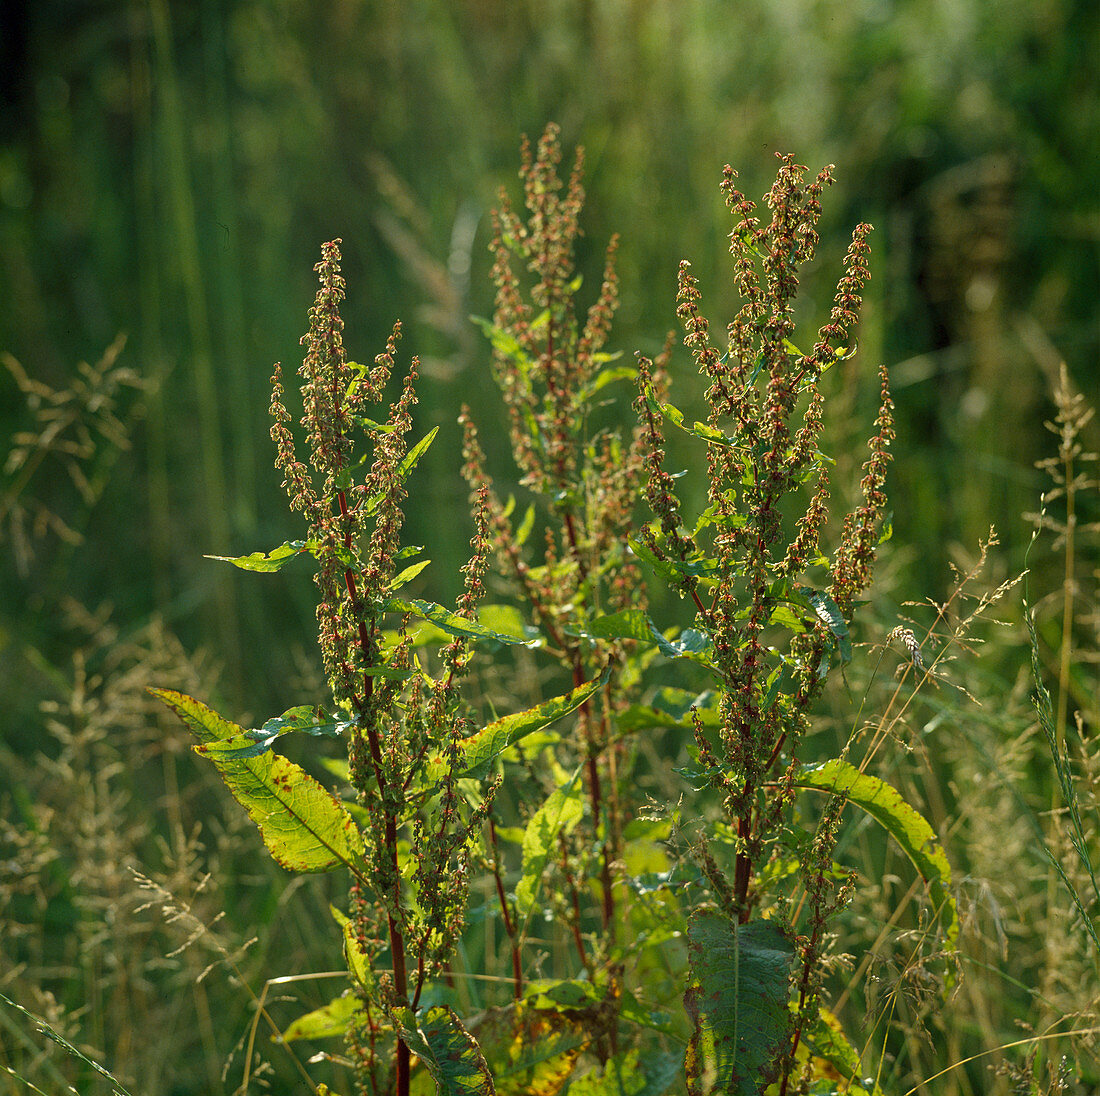 Rumex crispus, is used in homeopathy for dry cough